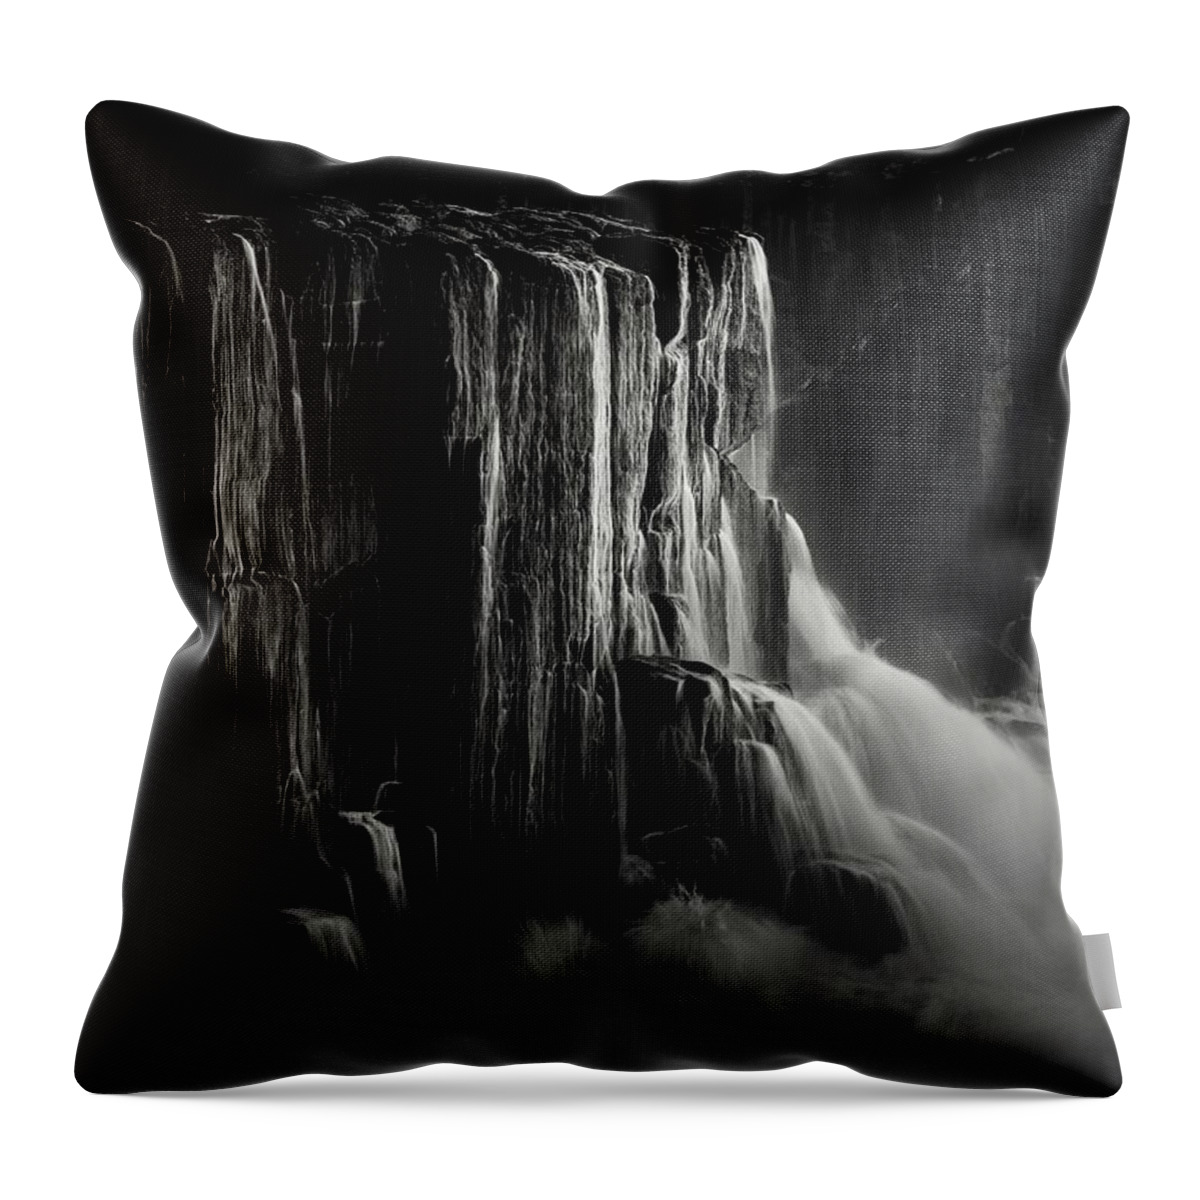 Monochrome Throw Pillow featuring the photograph Bombo by Grant Galbraith